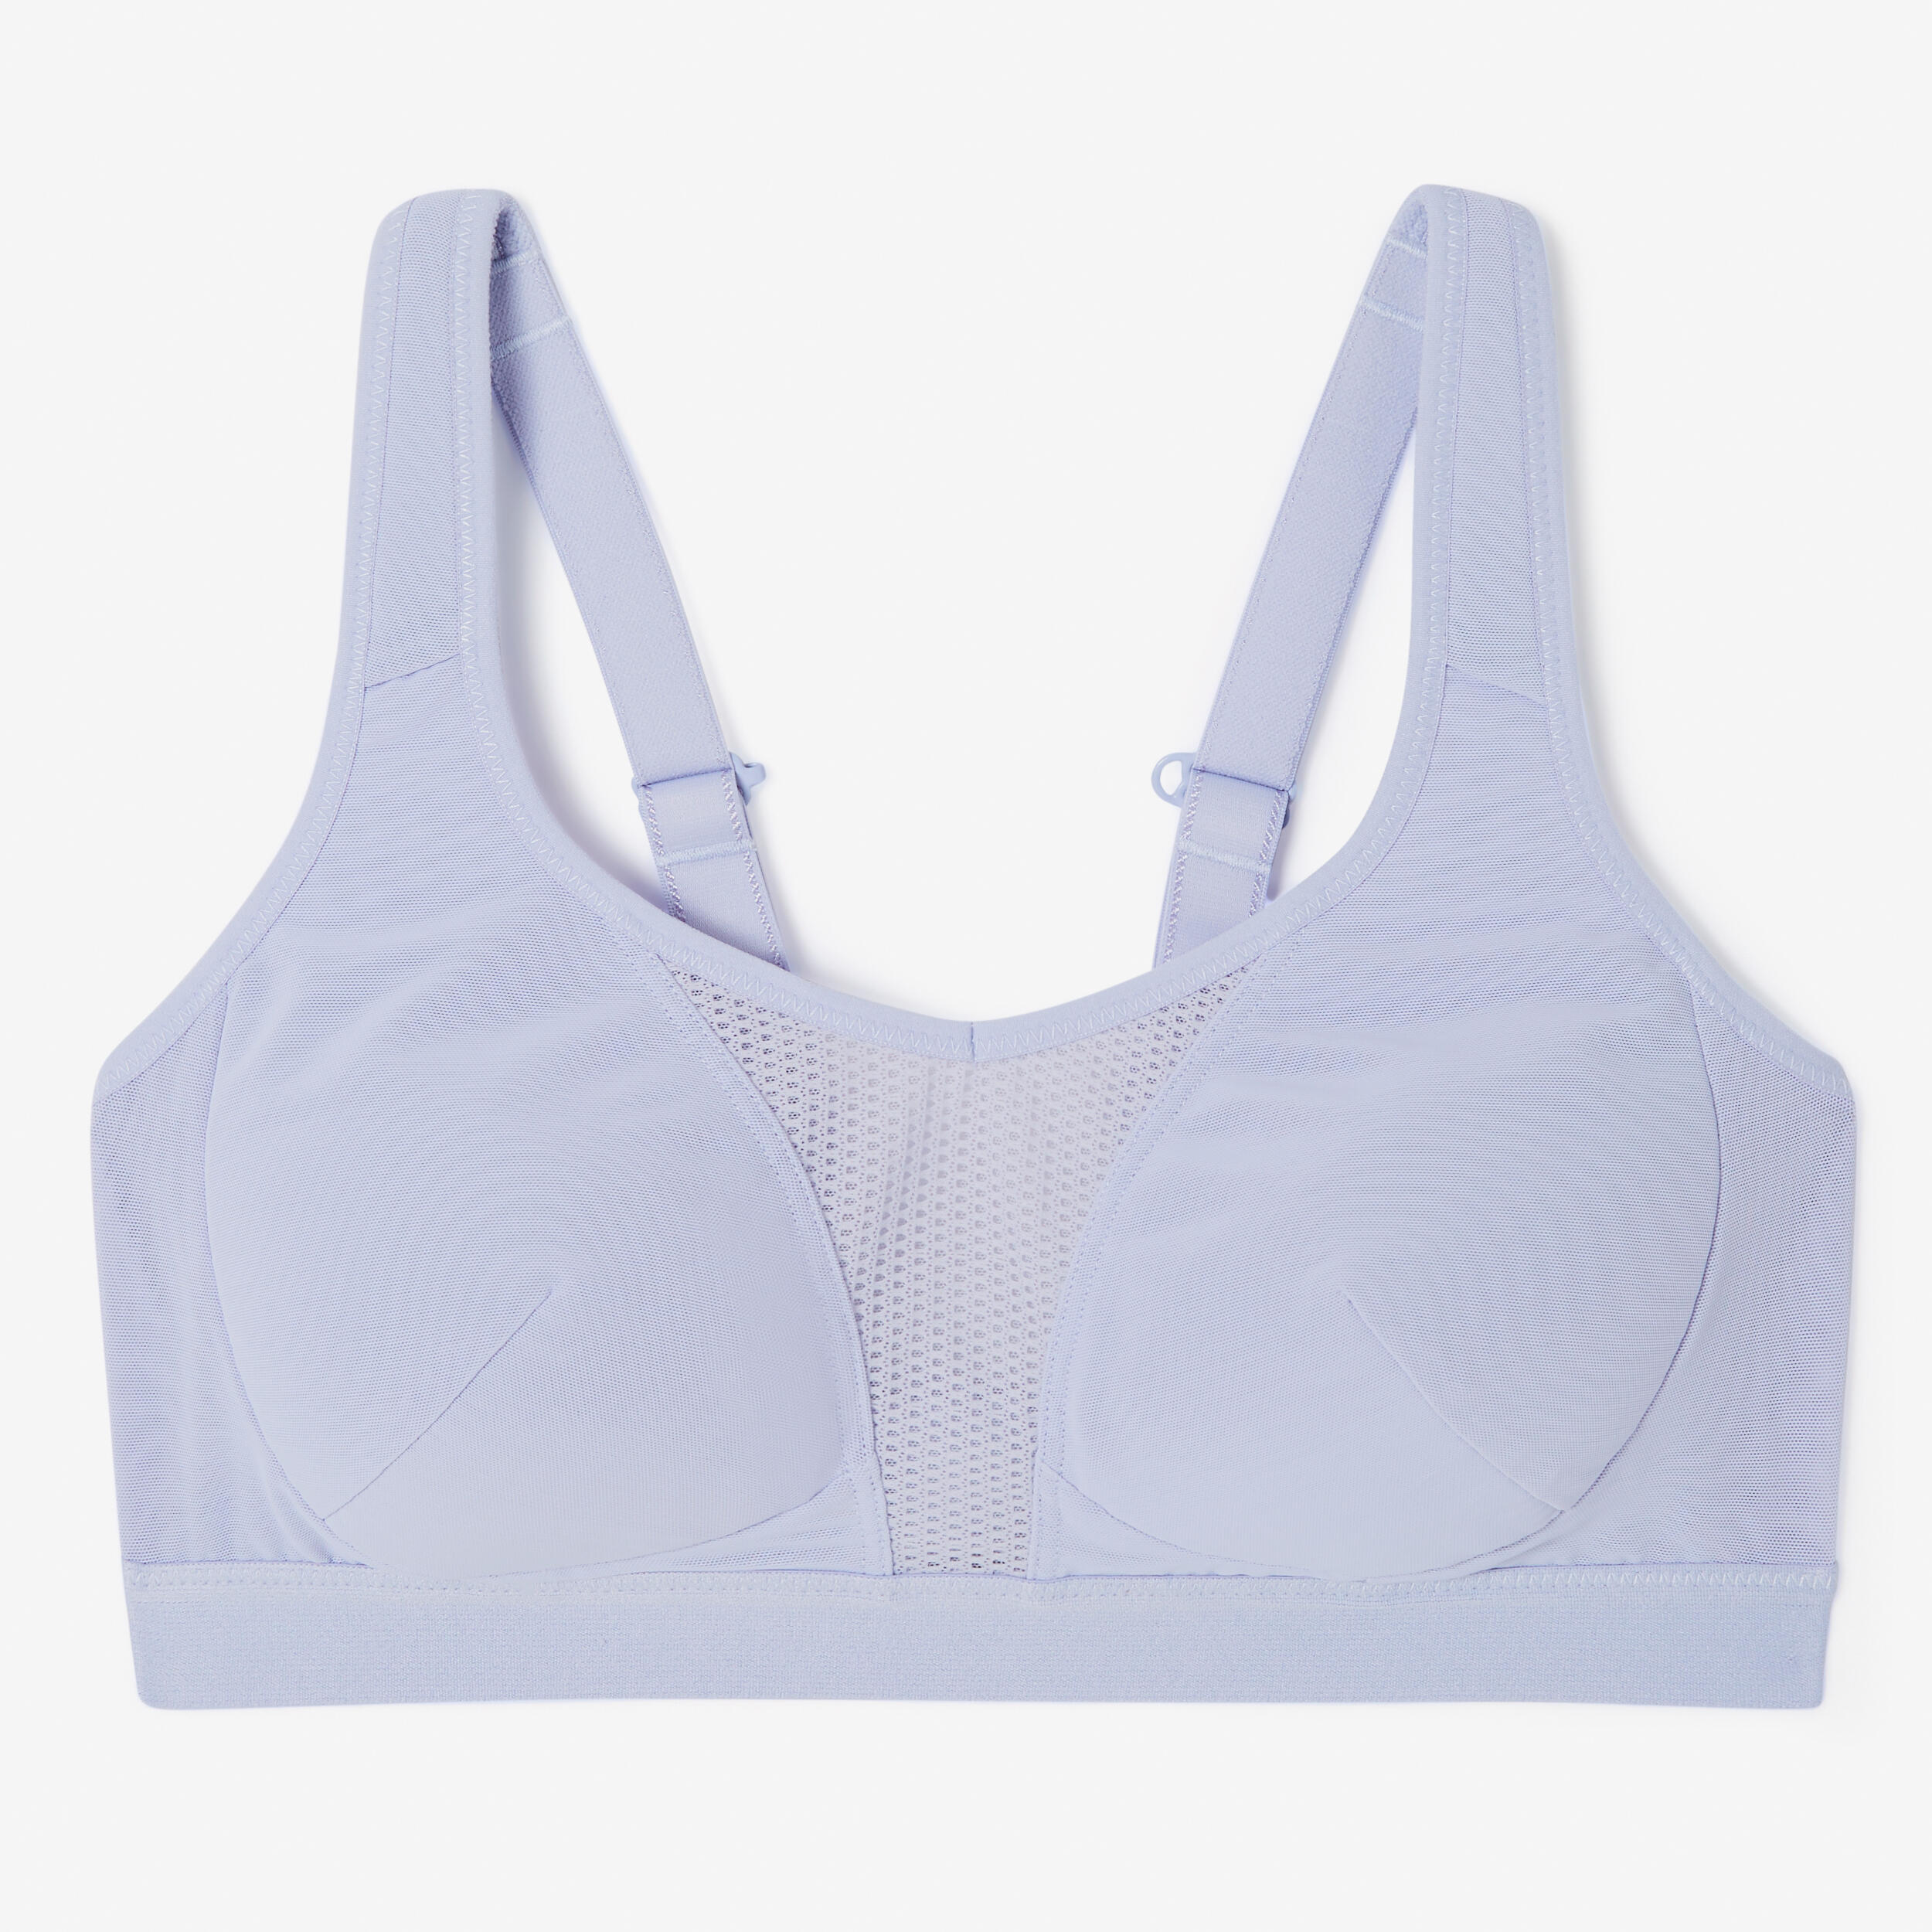 Women's High Support Bra with Crossed Straps - Light blue 2/5